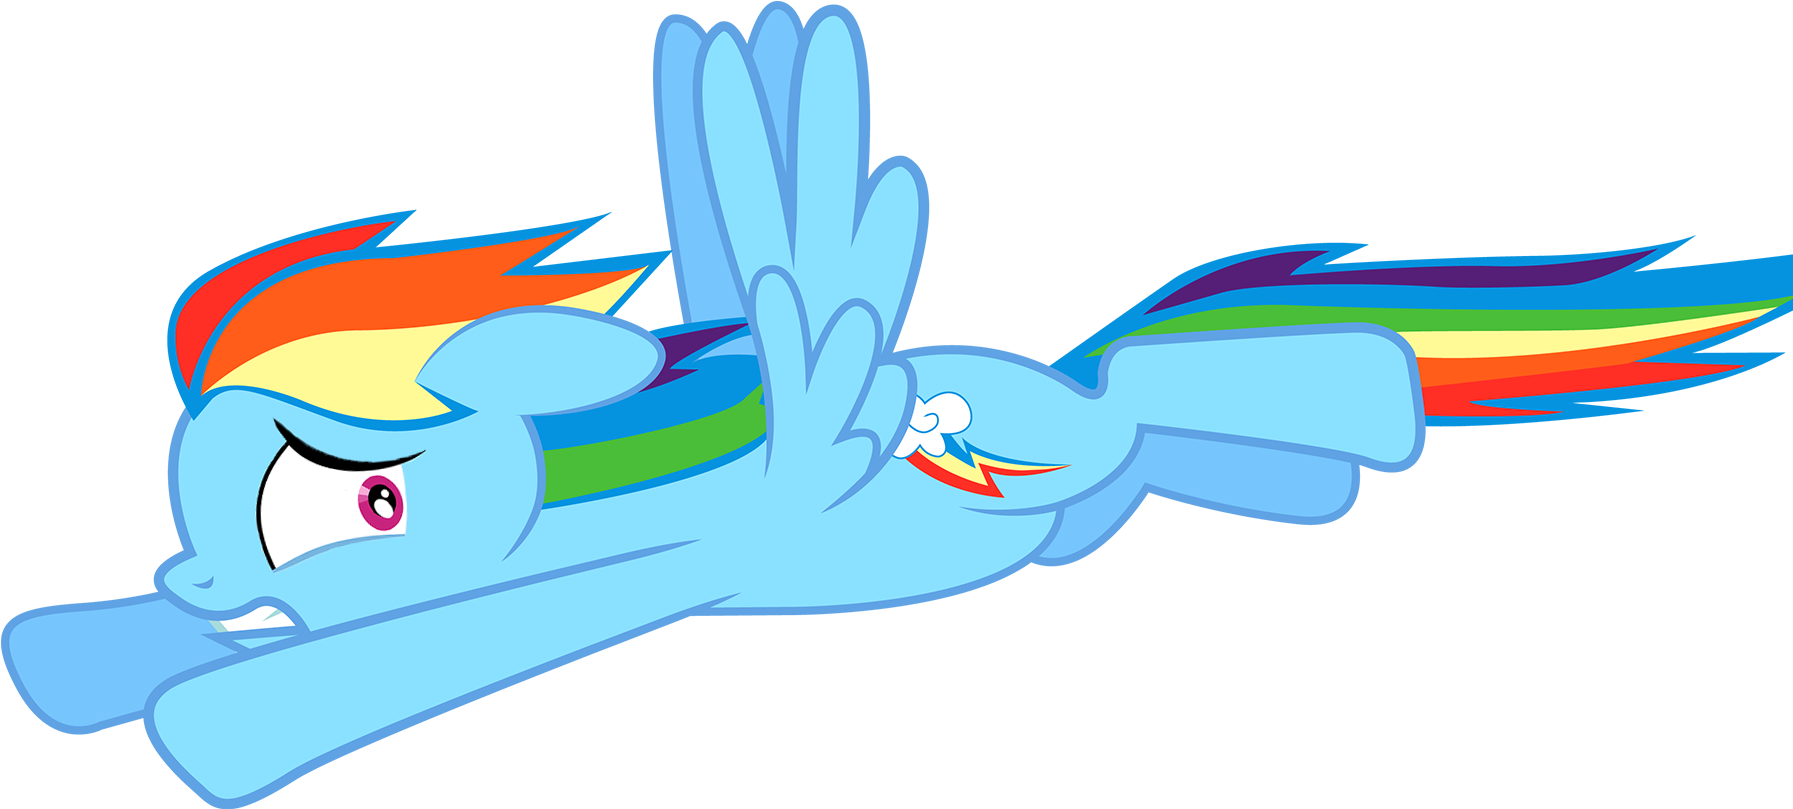 Asset, Flying Away, Photoshop, Rainbow Dash, Safe, - My Little Pony Facts About Rainbow Dash (1900x1200)